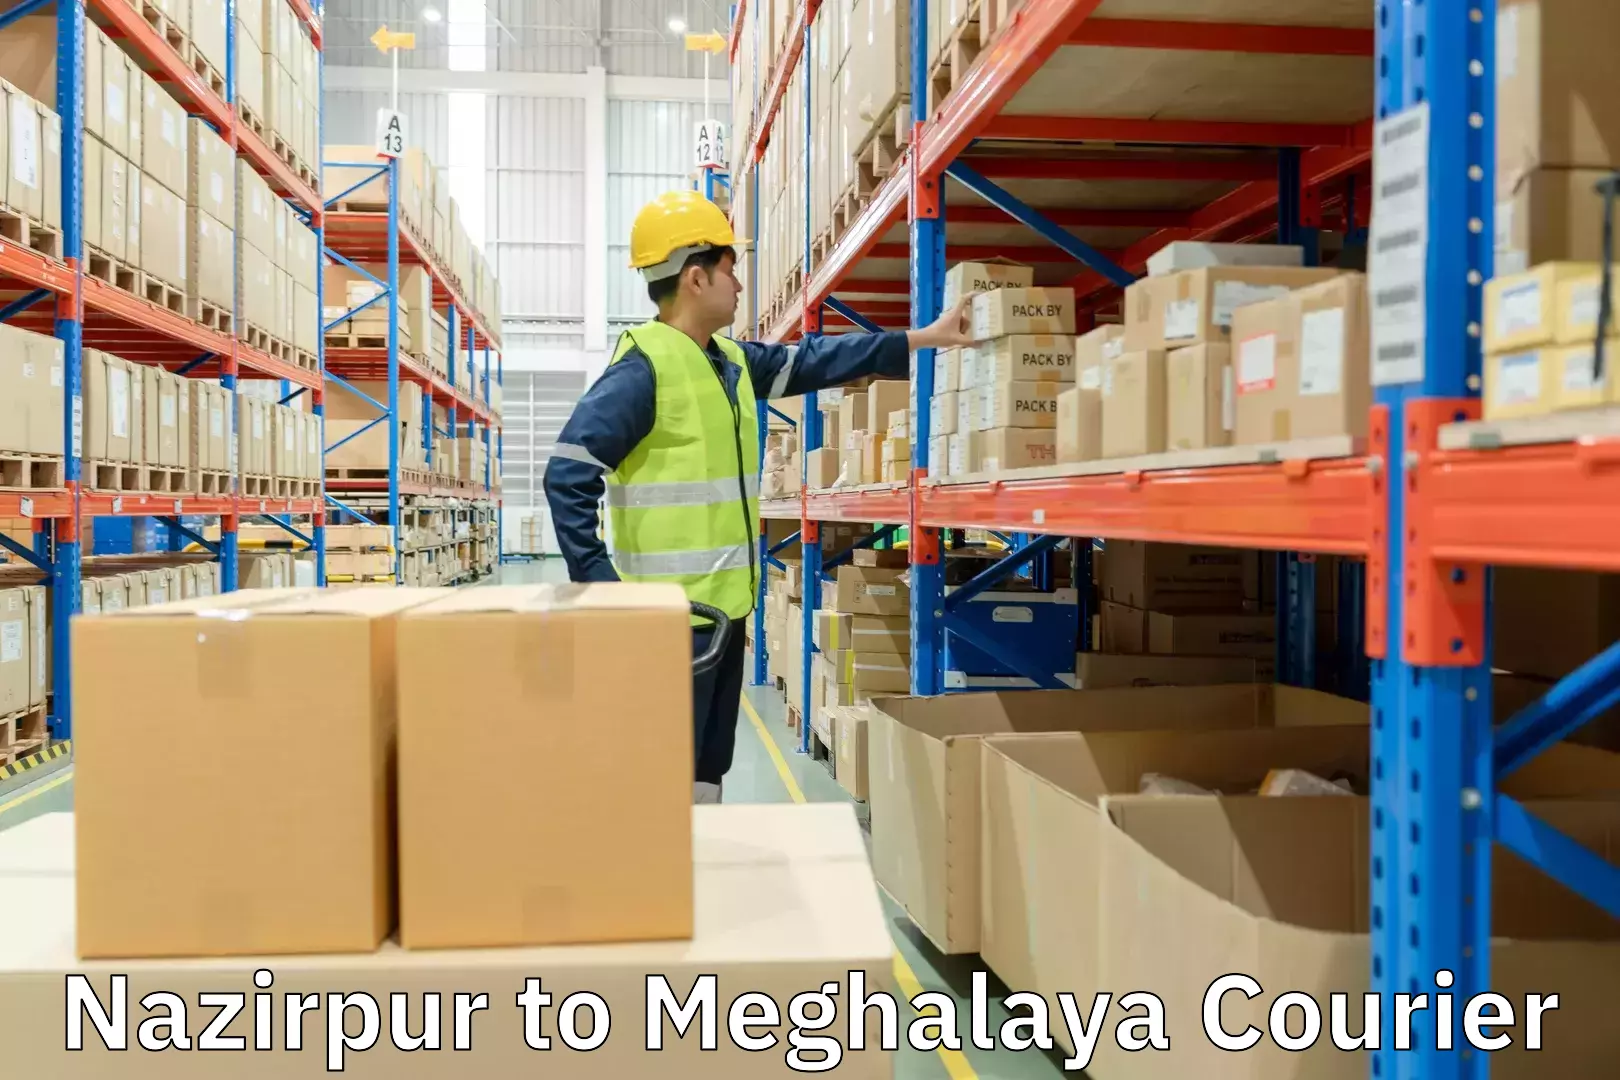 Cash on delivery service Nazirpur to Meghalaya